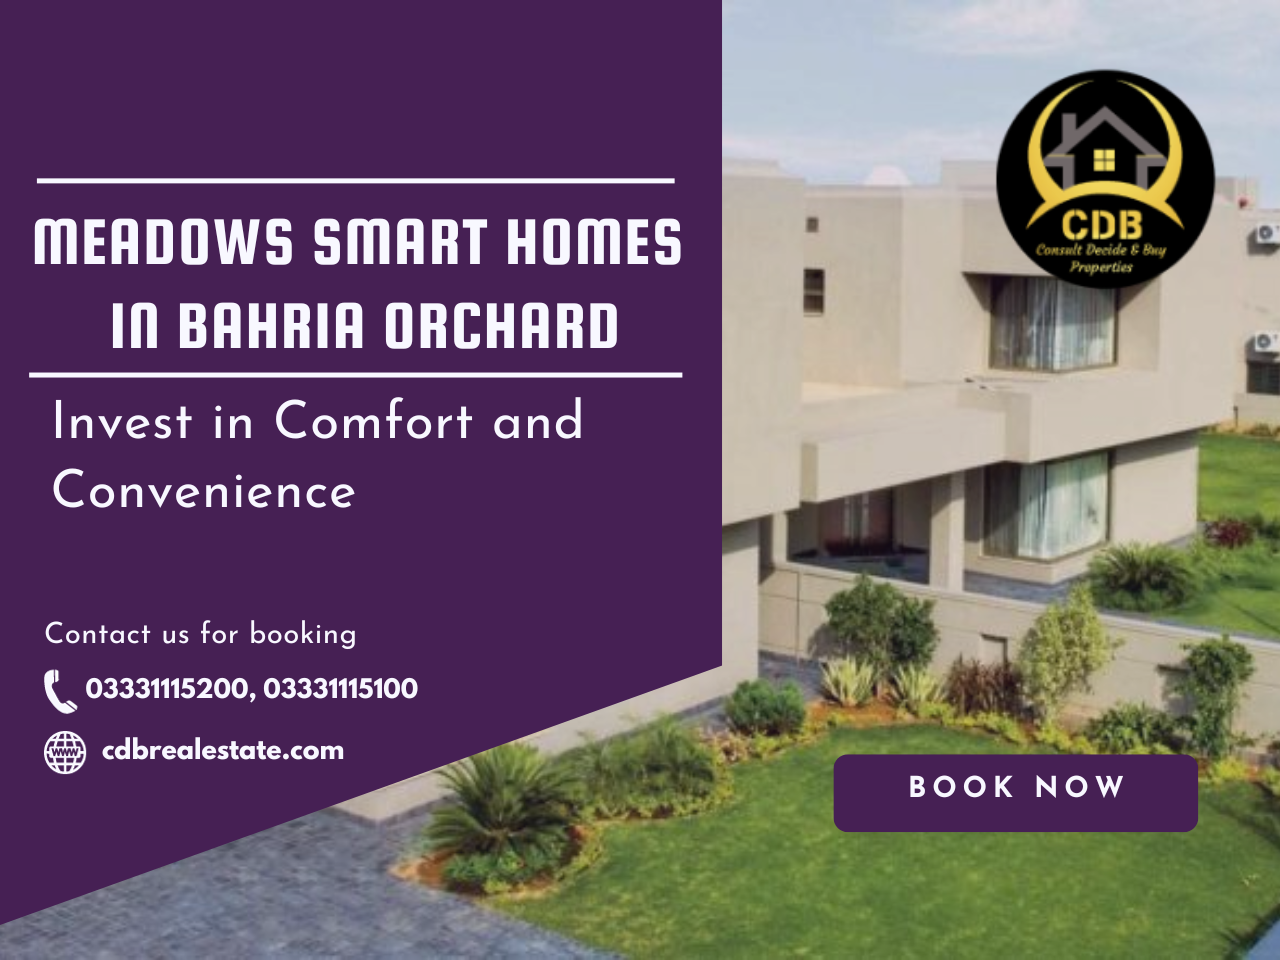 Meadows Smart Homes in Bahria Orchard: Invest in Comfort and Convenience